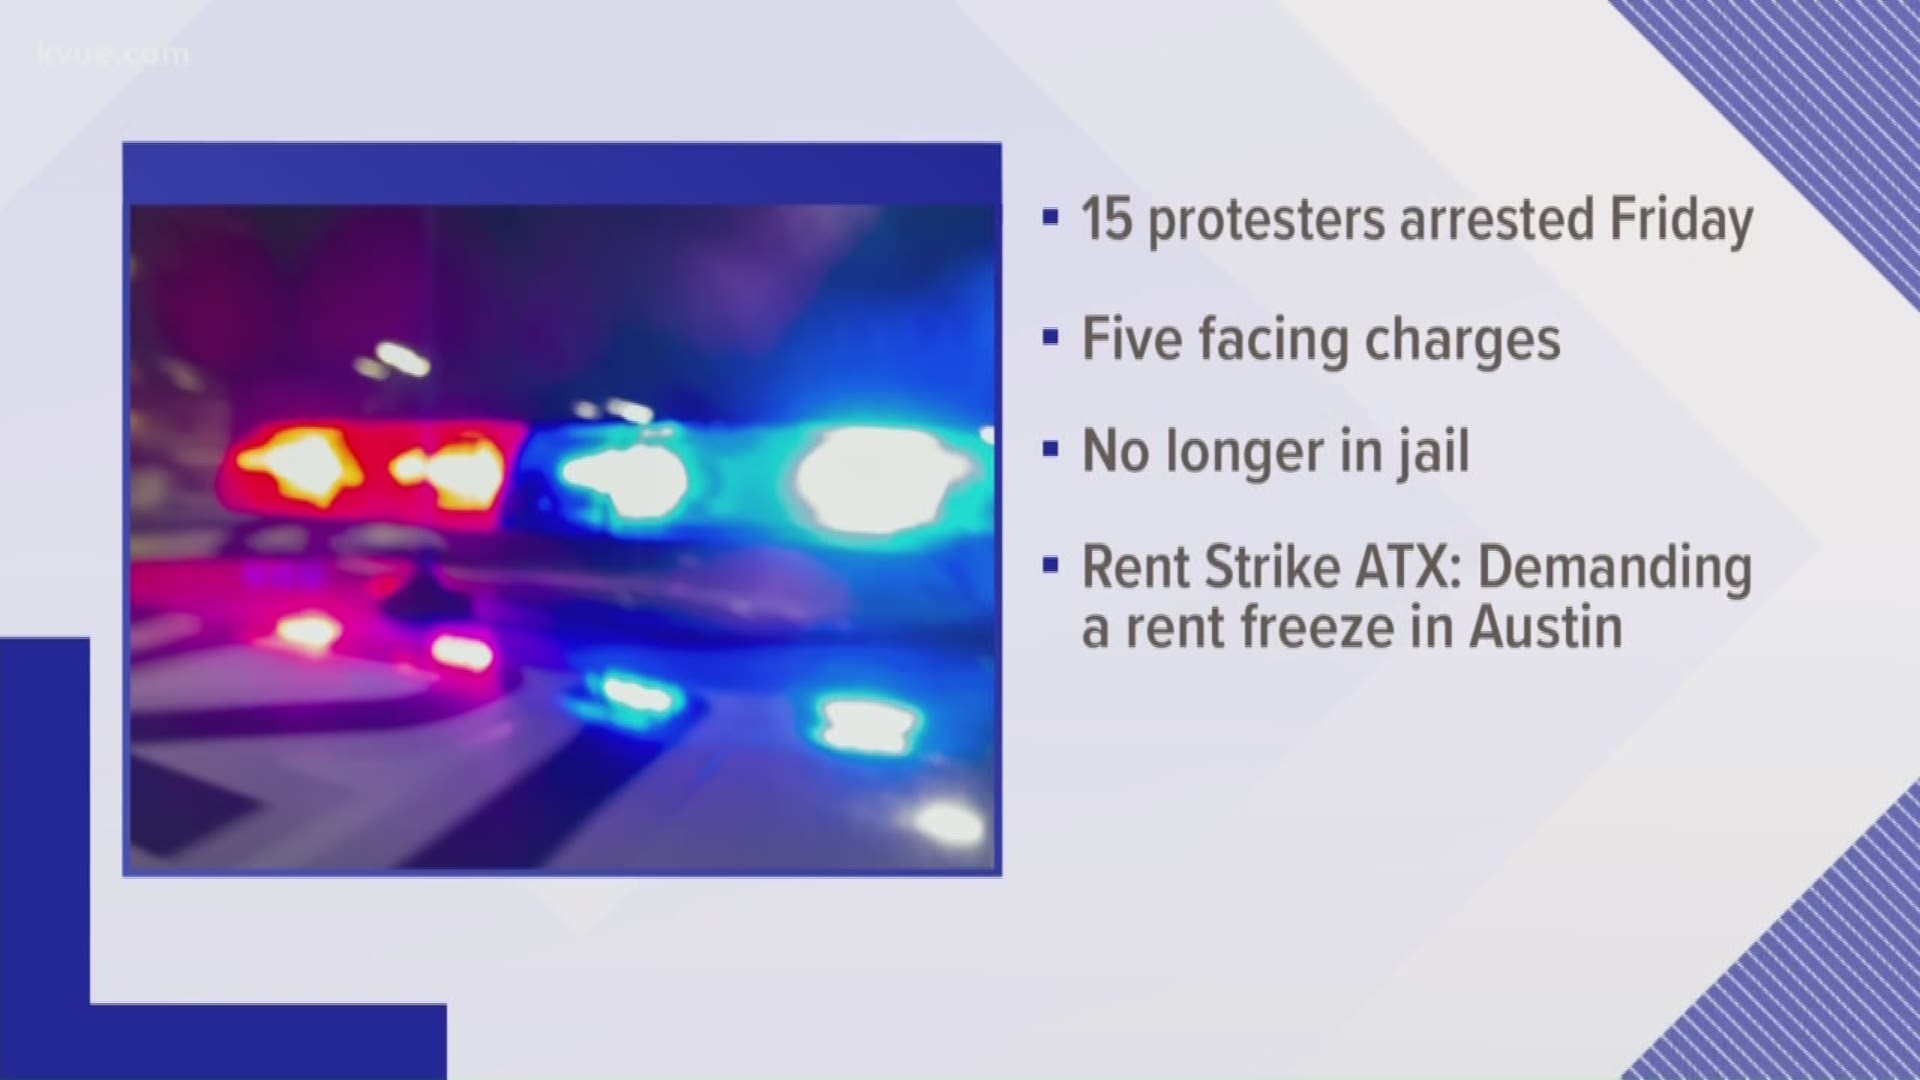 The individuals from the group Rent Strike ATX were part of a caravan slowing traffic to a standstill as part of a protest to demand rent relief for tenants.